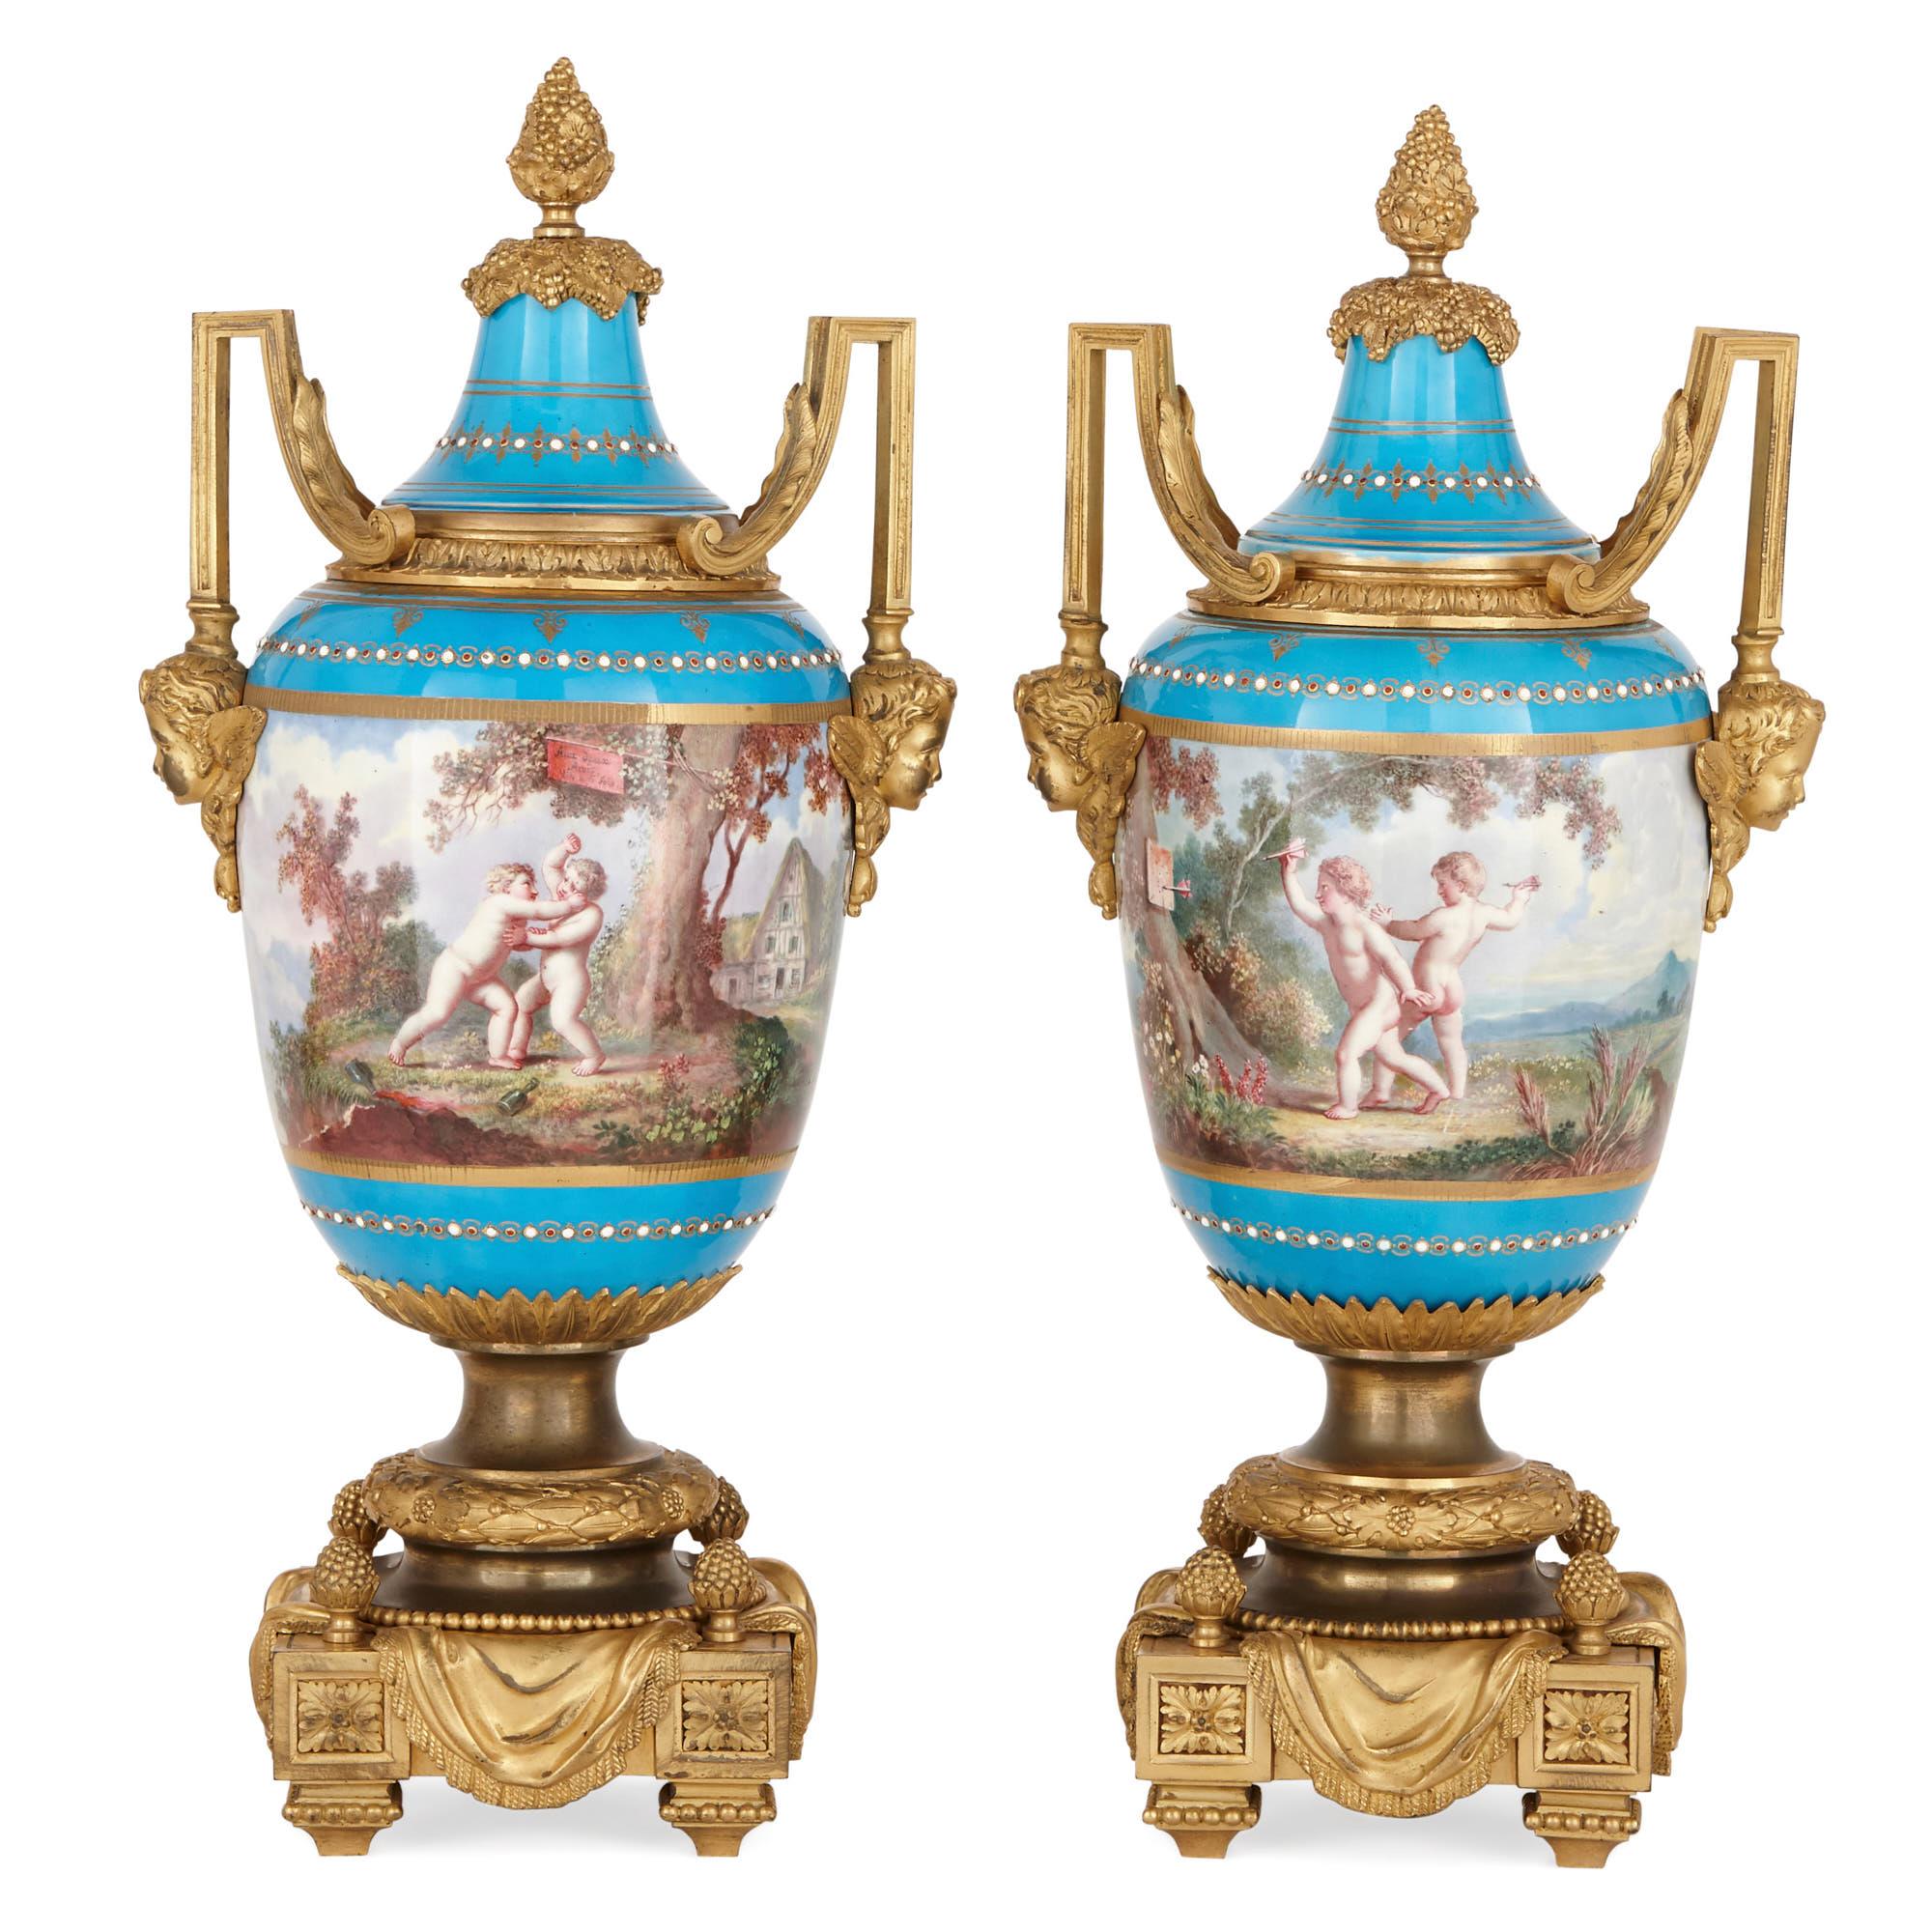 With its exquisite paintings of putti playing sports in Arcadian landscapes, this ‘bleu celeste’ garniture demonstrates the exceptional beauty and high-quality craftsmanship of Sevres factory porcelain. In addition to this, the porcelain vases are